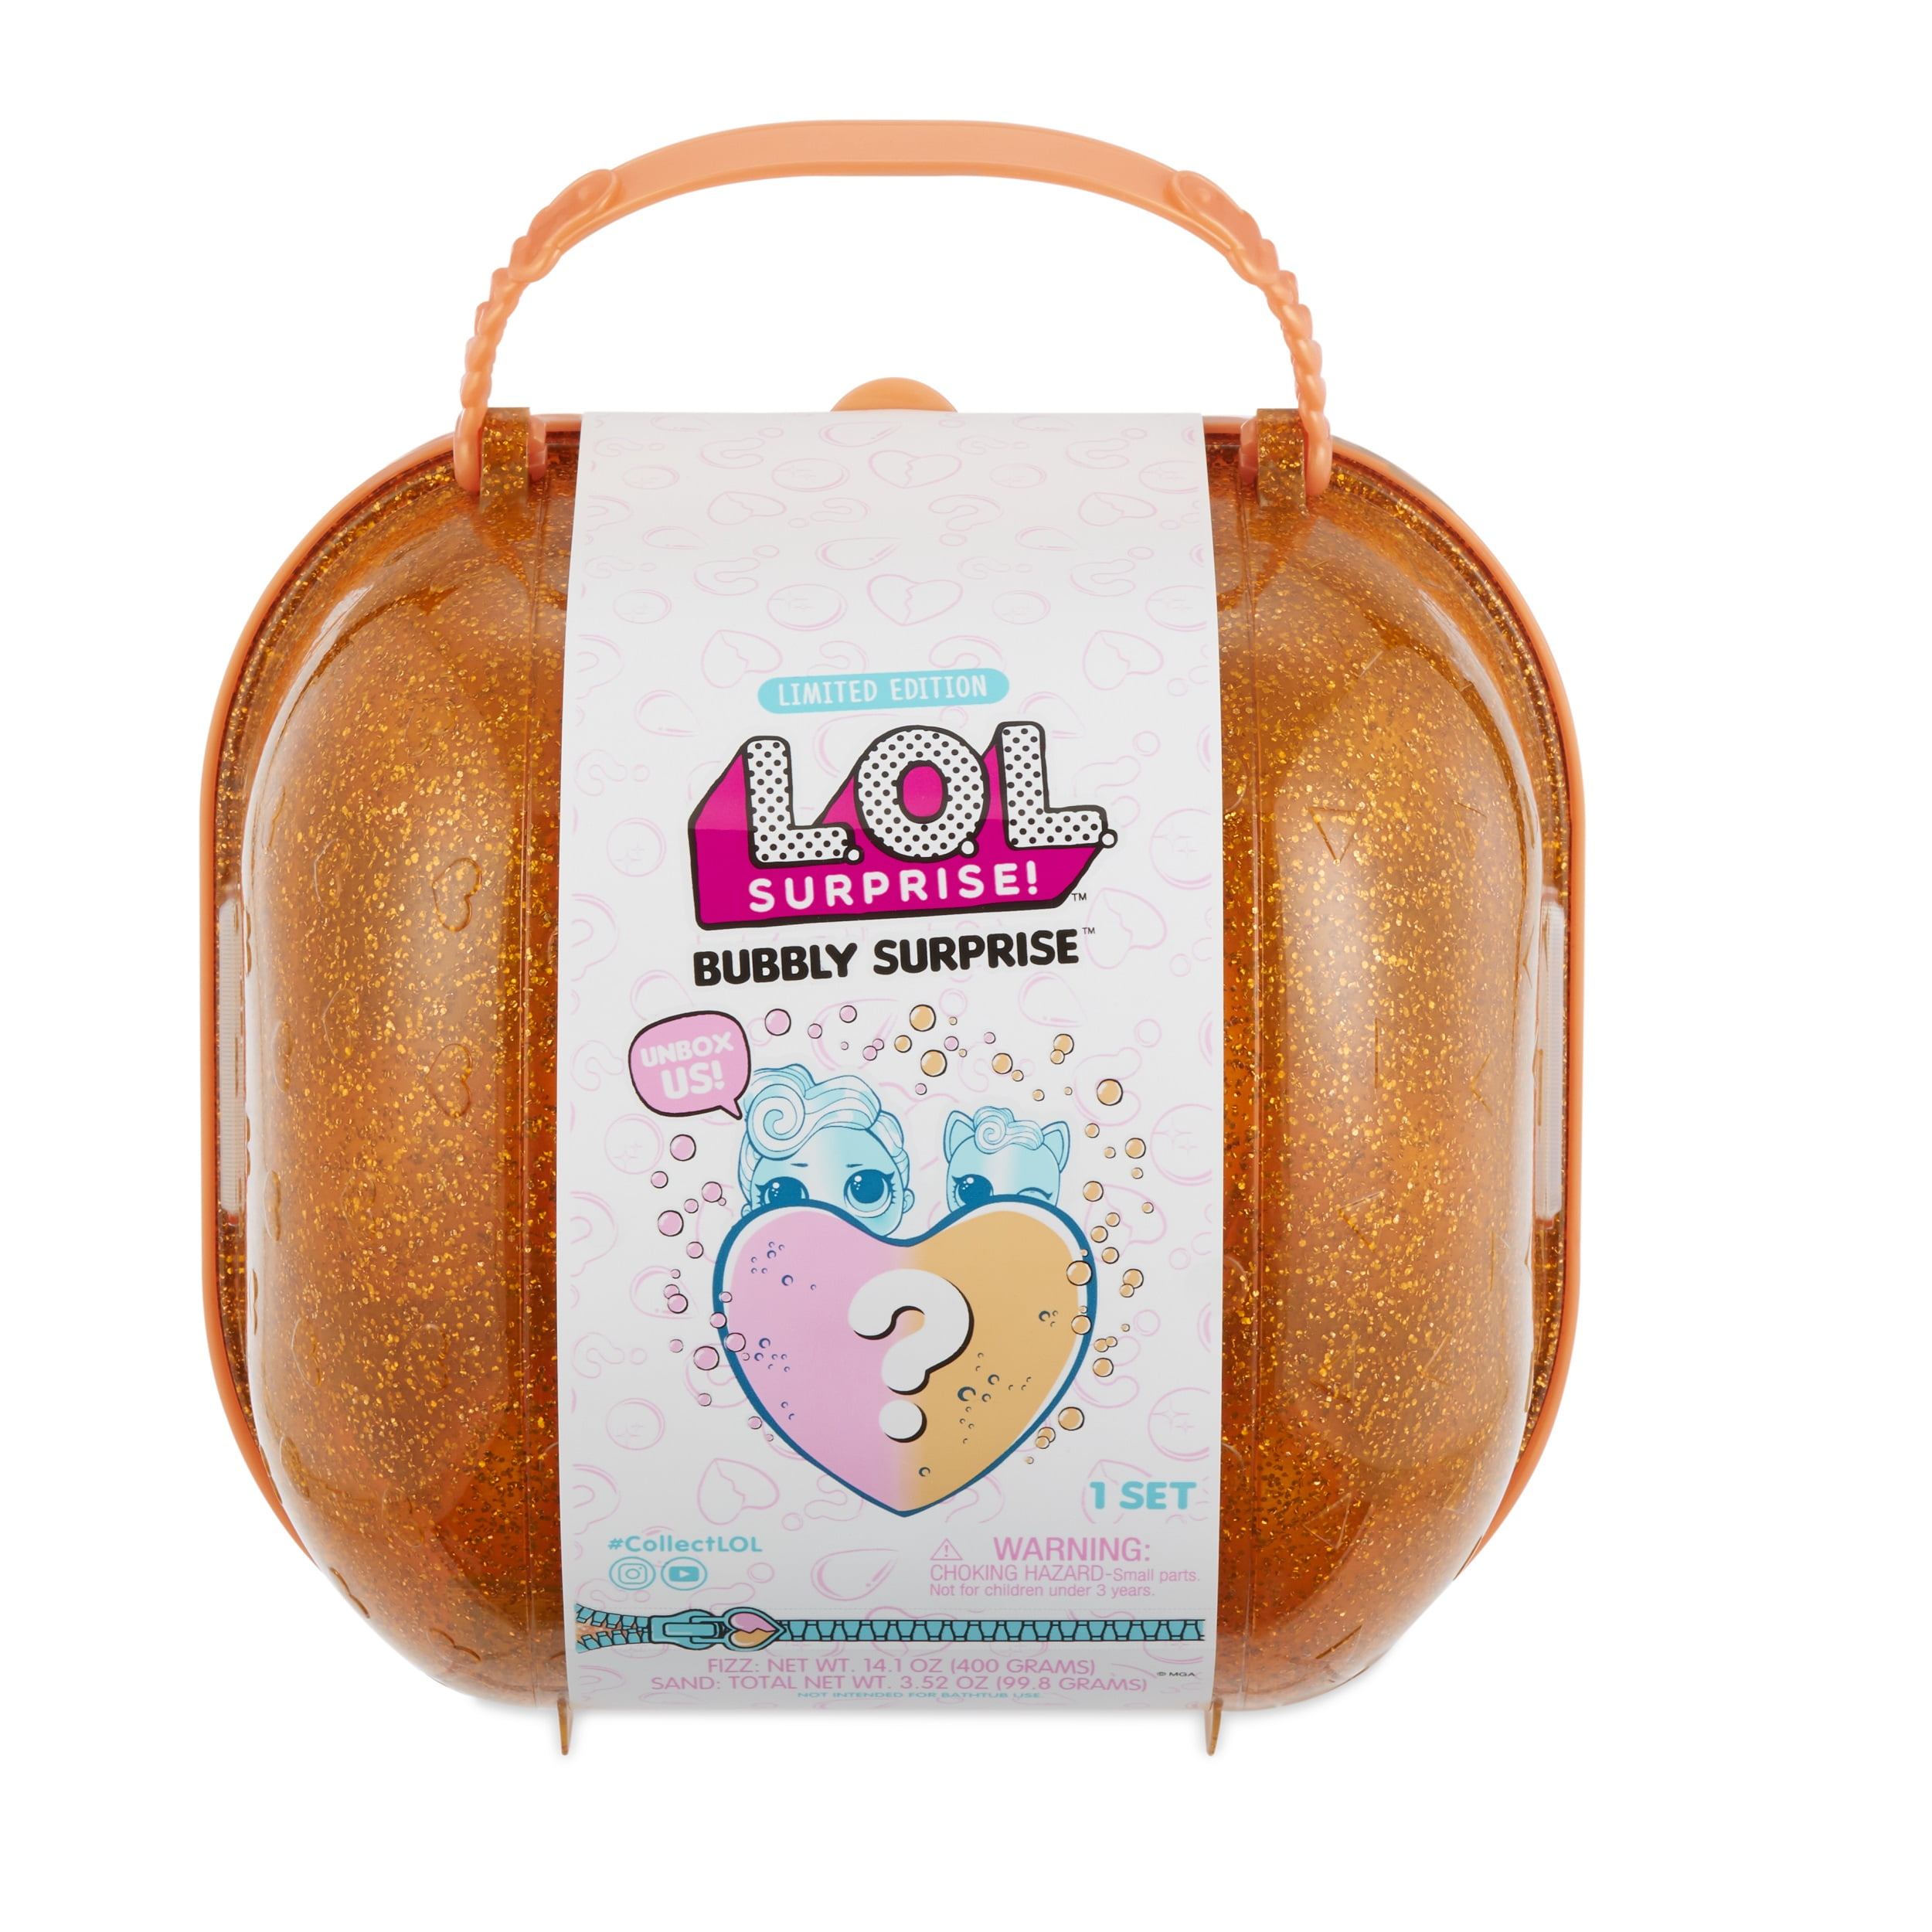 L.O.L Surprise! LOL Surprise Bubbly Surprise (Orange) With Exclusive Doll and Pet, Great Gift for Kids Ages 4 5 6+